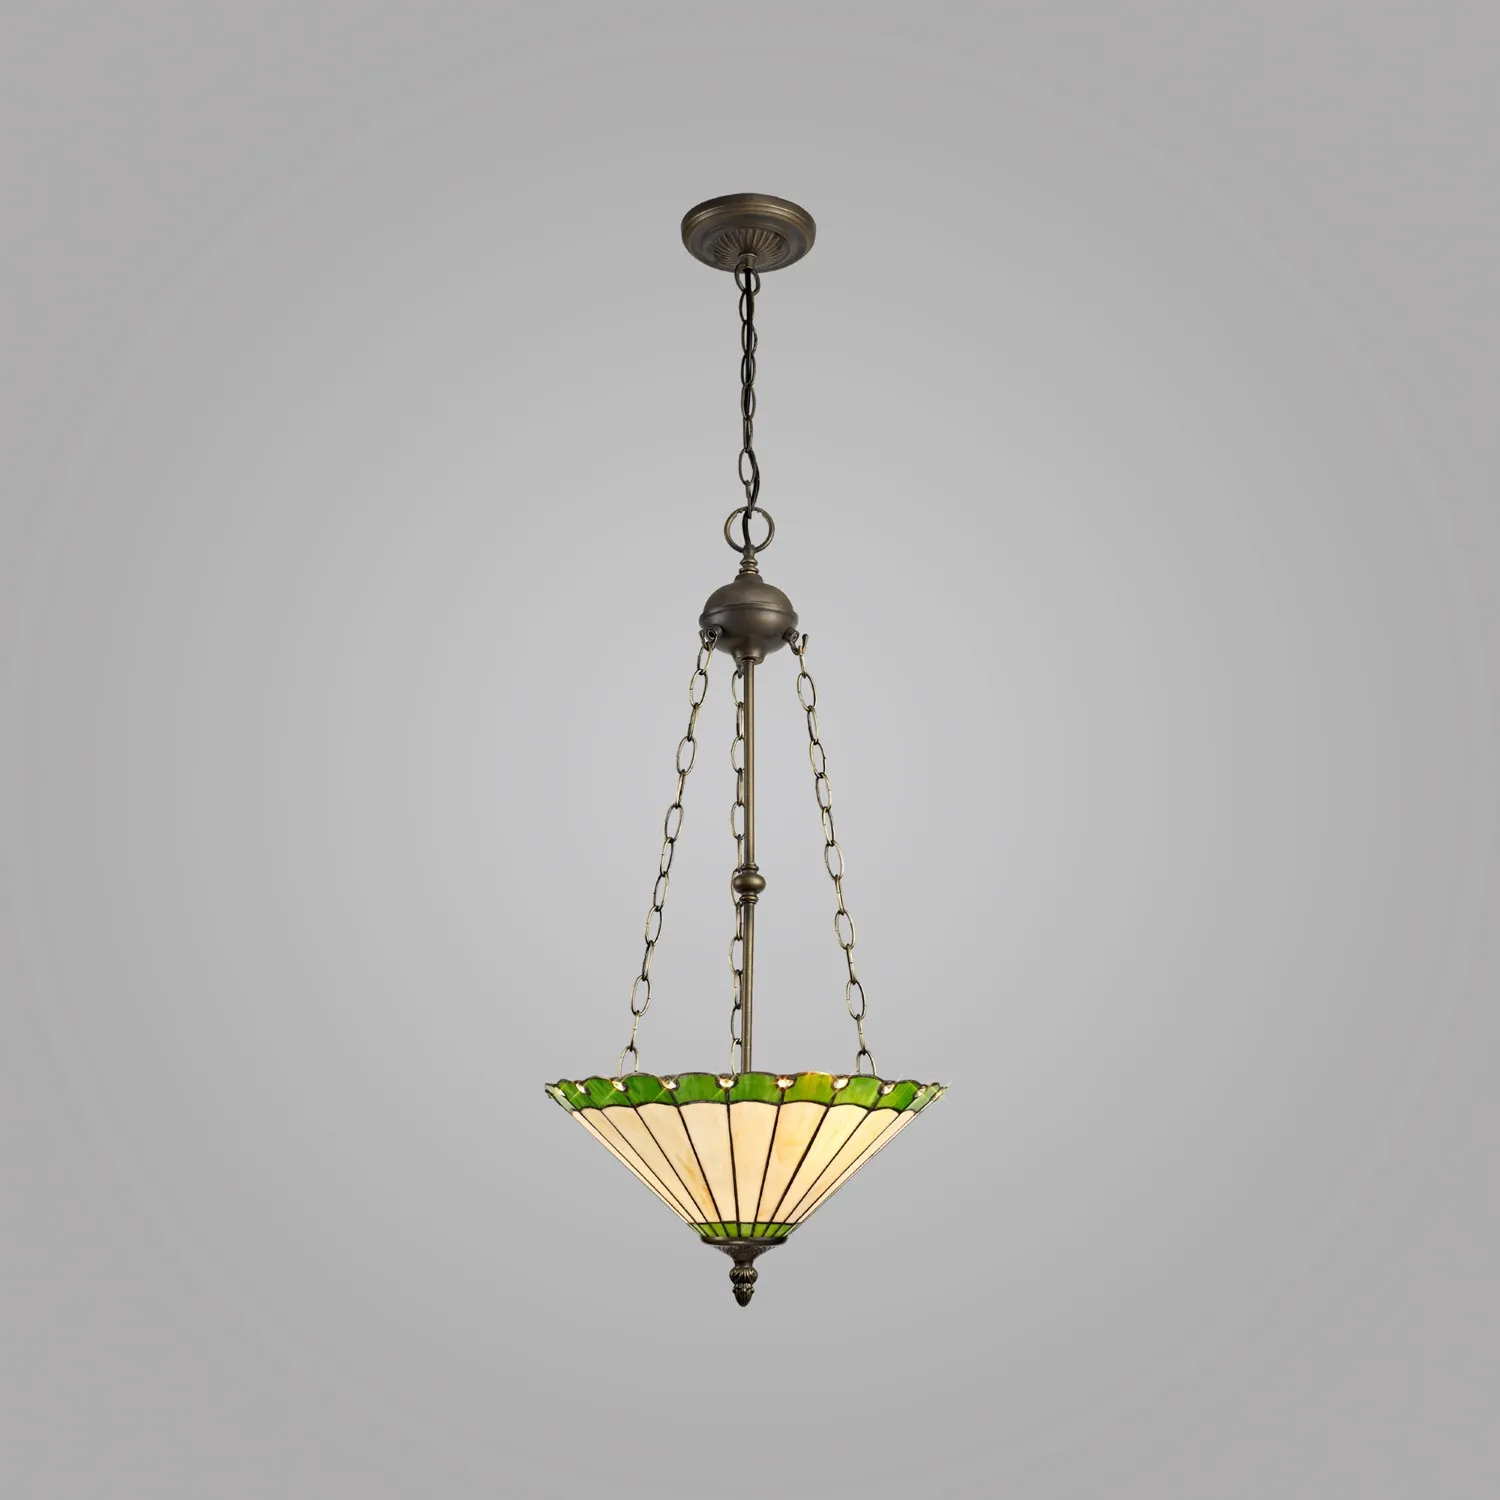 Ware 3 Light Uplighter Pendant E27 With 40cm Tiffany Shade, Green Cream Crystal Aged Antique Brass